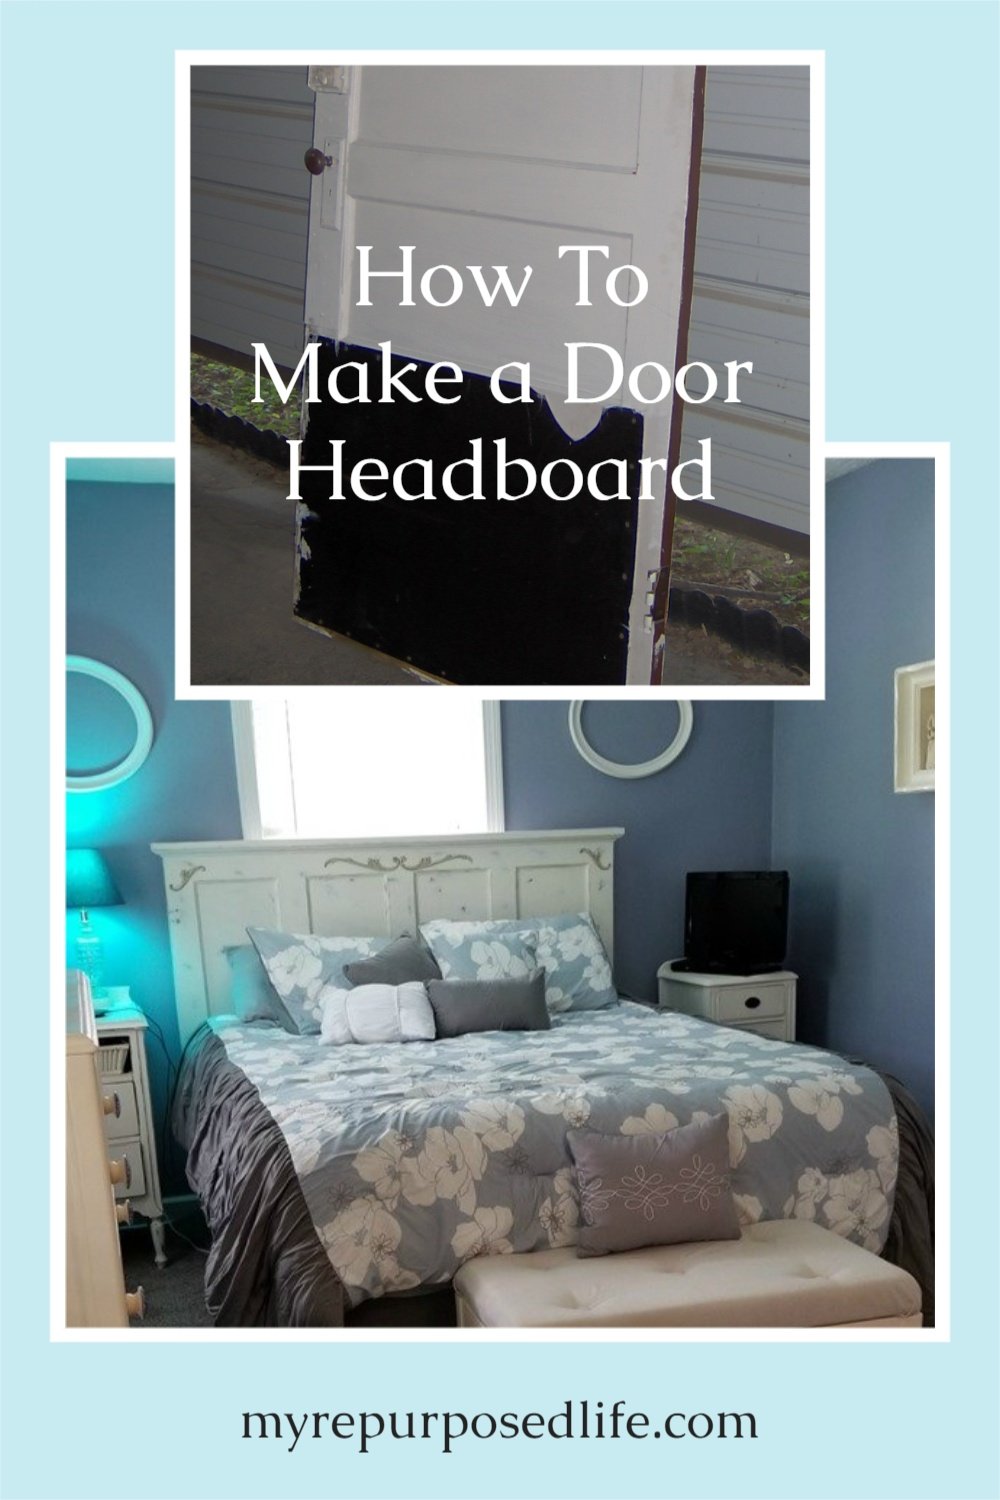 Tips on how to make a repurposed door headboard. The ugliest door in the world becomes a great (loved) headboard. Even though it's seen changes over the years. #upcycle #repurpose #MyRepurposedLife #door #headboard #diy via @repurposedlife